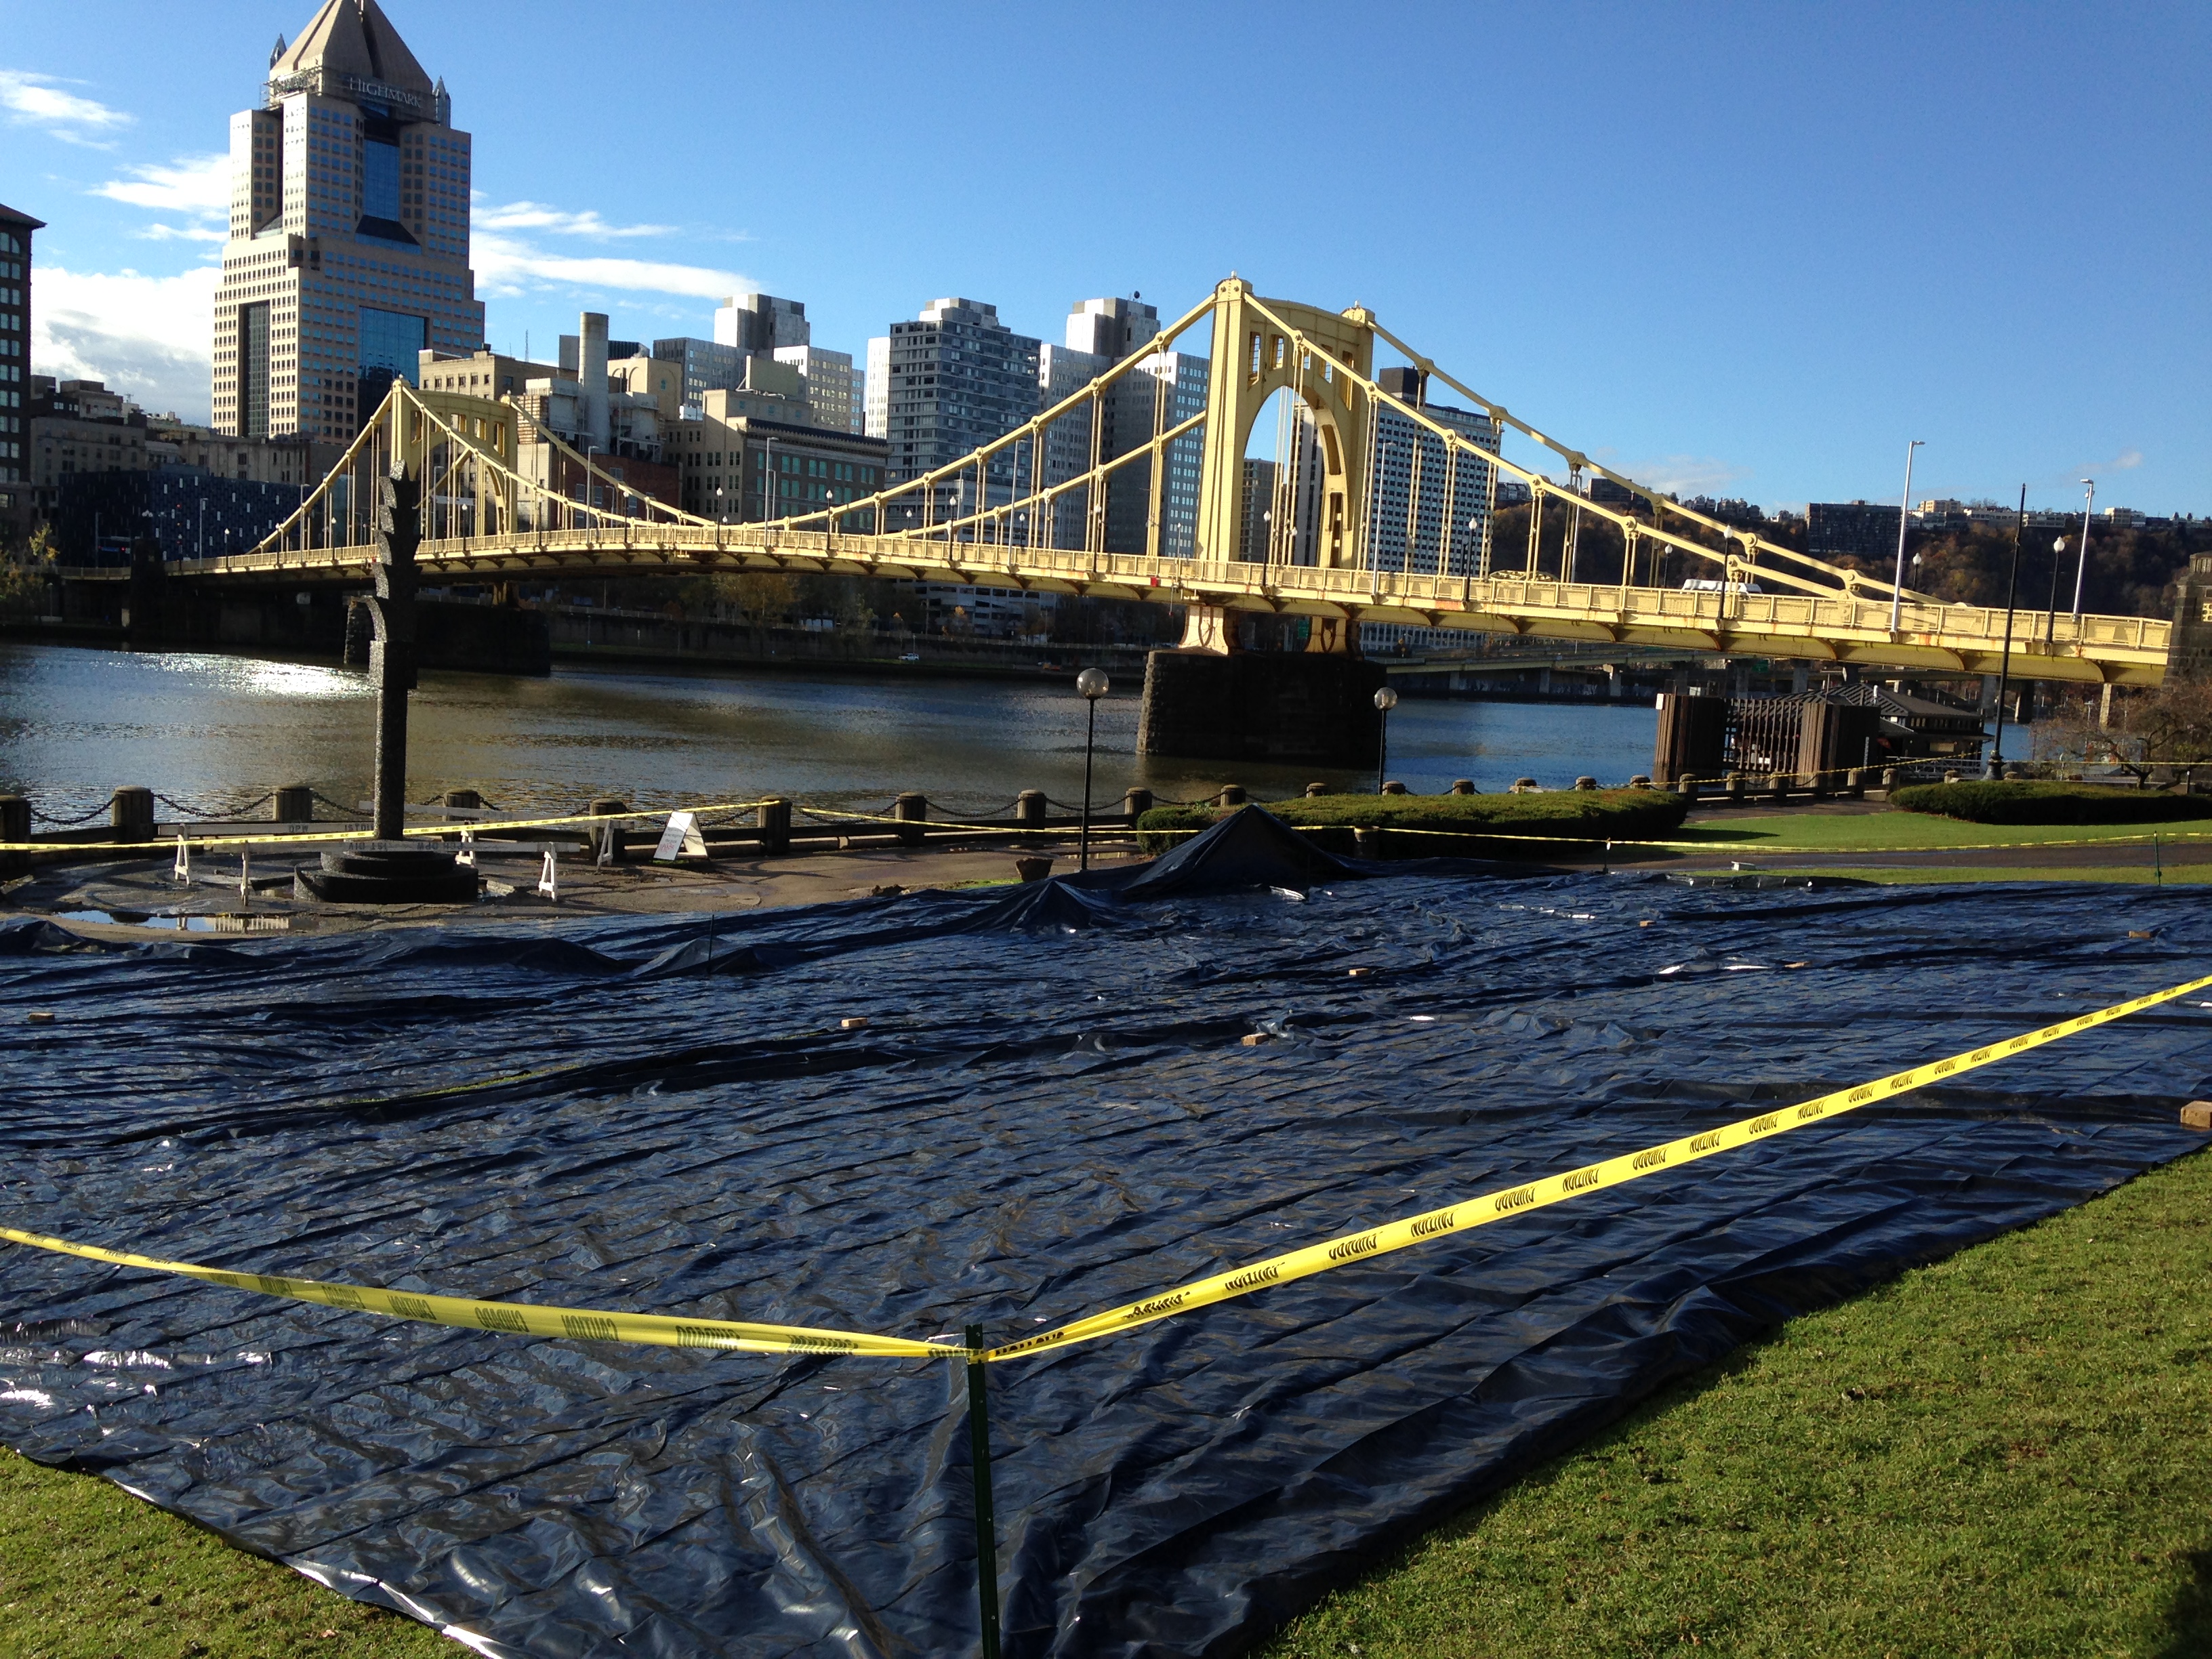 The tarp represented the proposed drop shaft hole, over 100 feet in diameter.